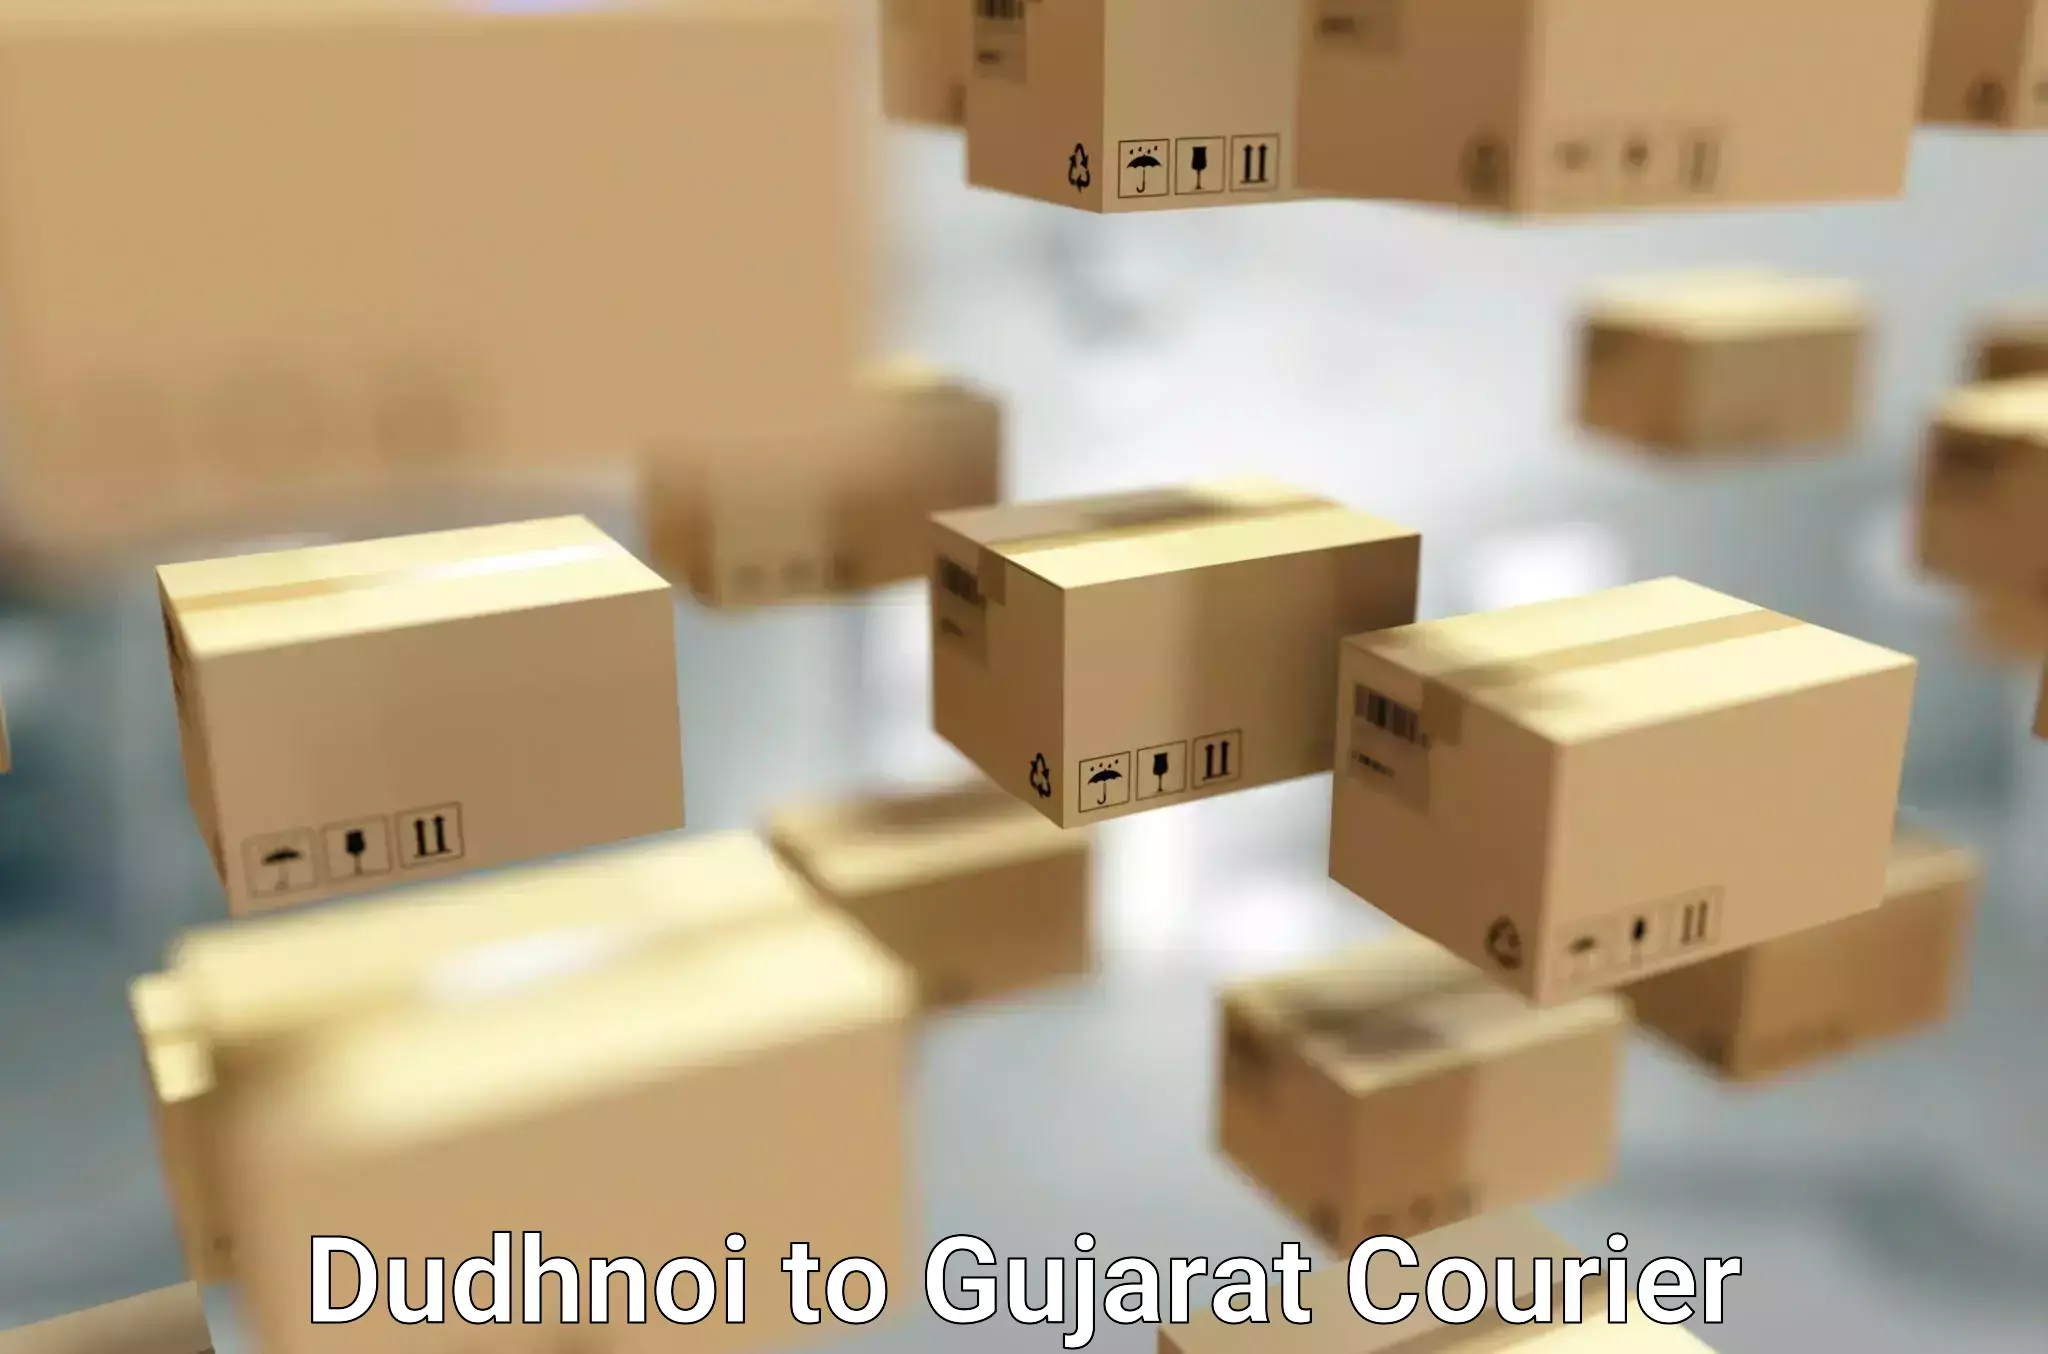 Trusted relocation experts Dudhnoi to Gujarat